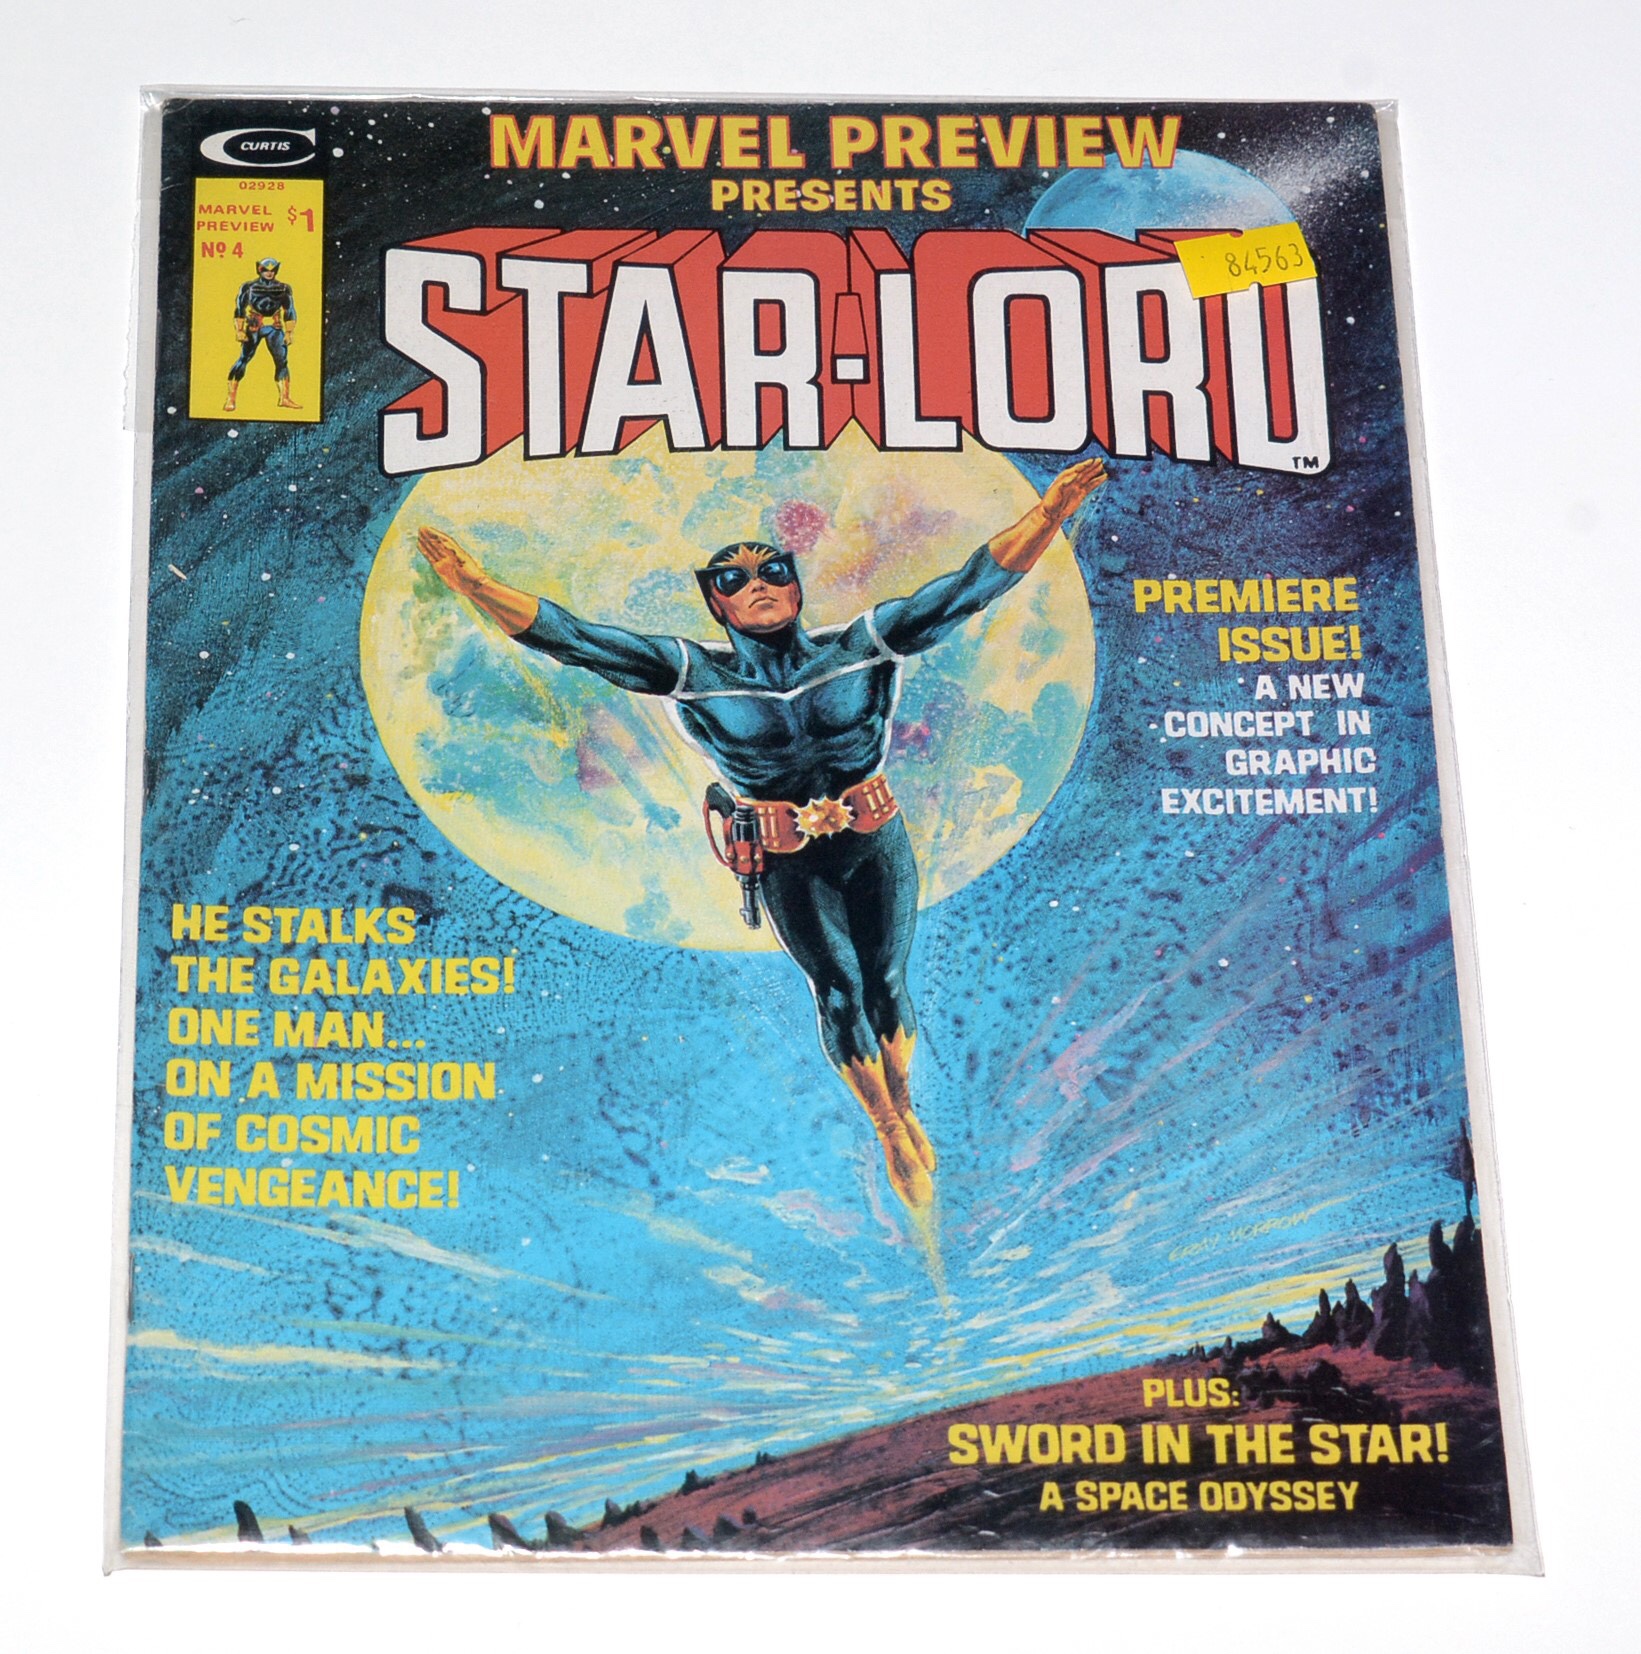 Marvel Preview Presents Star-Lord, No. 4 (Premier issue)